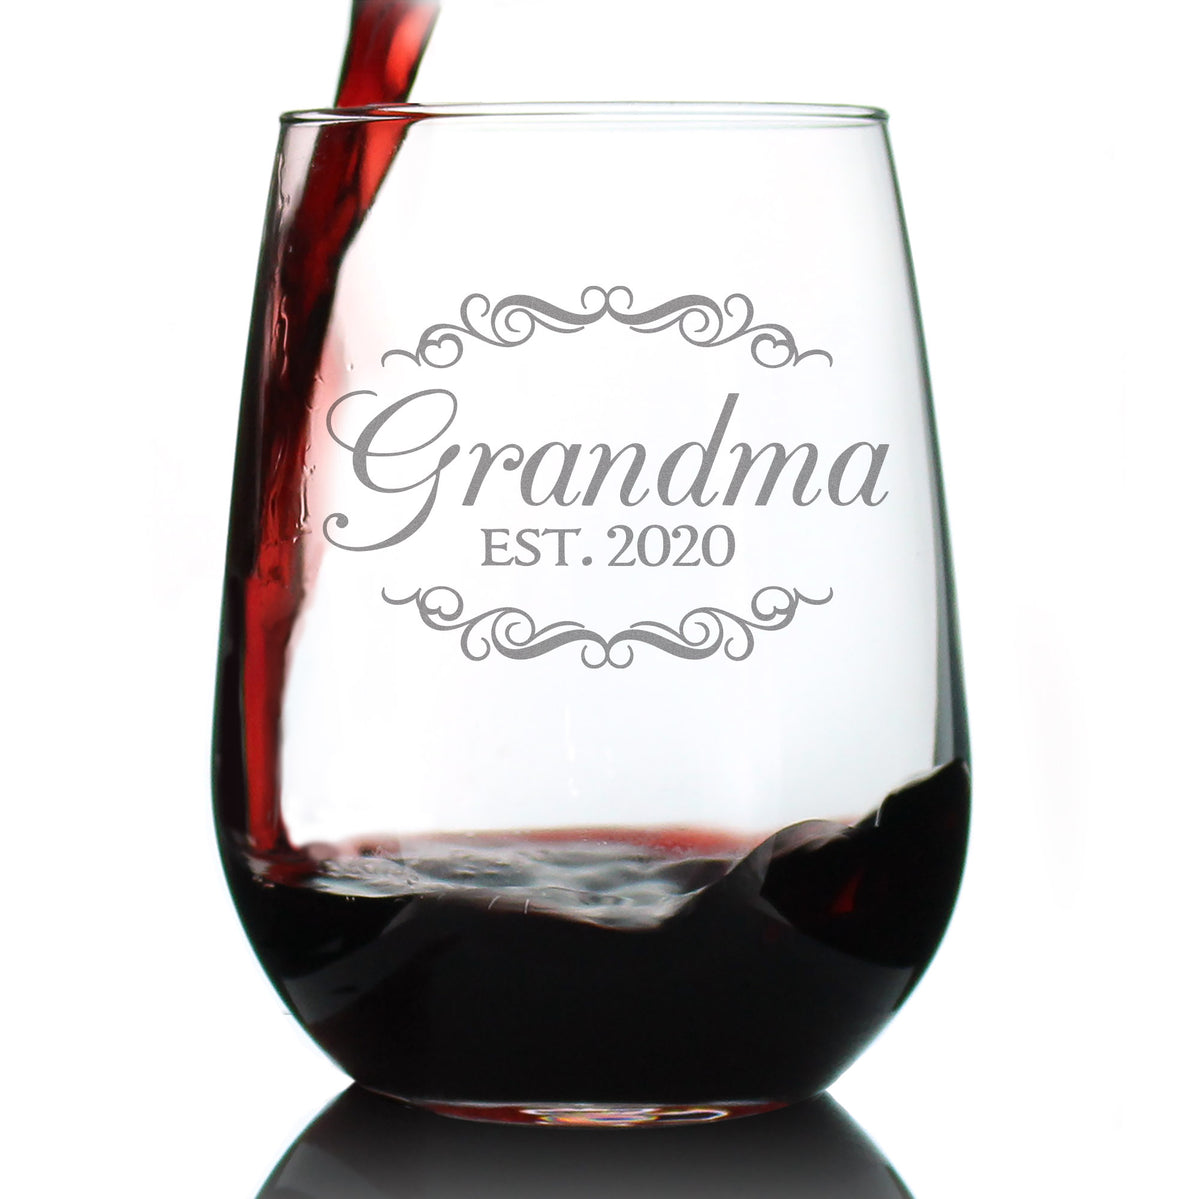 Grandma Est 2020 - New Grandmother Stemless Wine Glass Gift for First Time Grandparents - Decorative 17 Oz Large Glasses